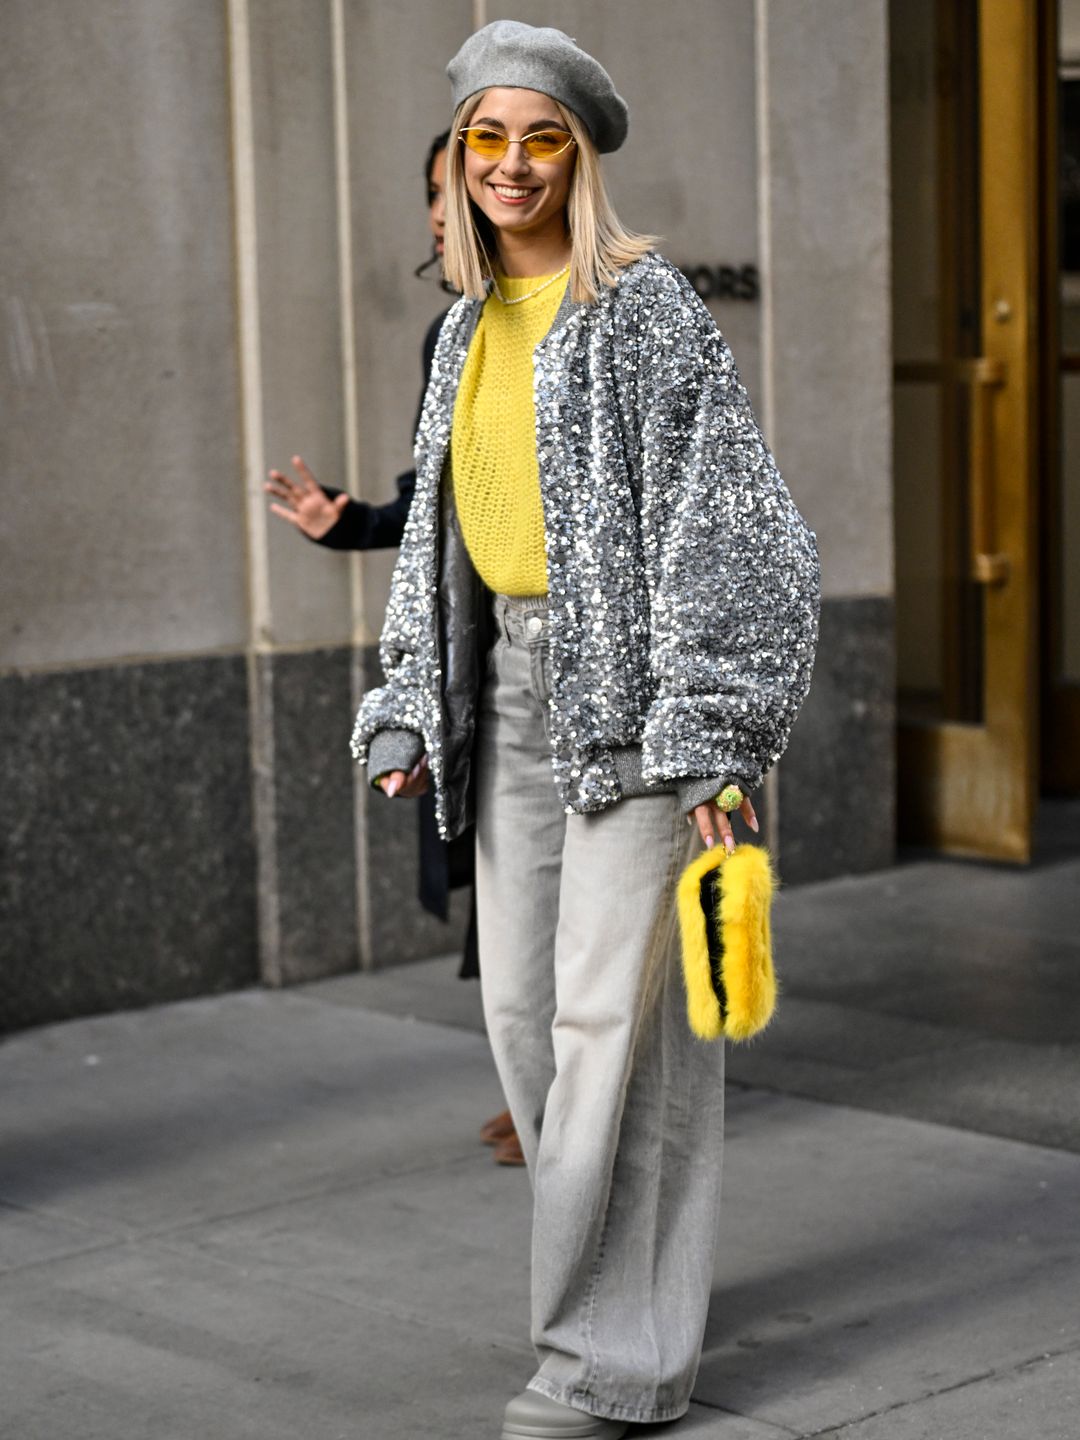 Olga Slobodianik is seen wearing a silver sequin bomber jacket, a bold-hued yellow sweater, grey jeans, a grey beret and a fluffy yellow bag outside the Collina Strada show.